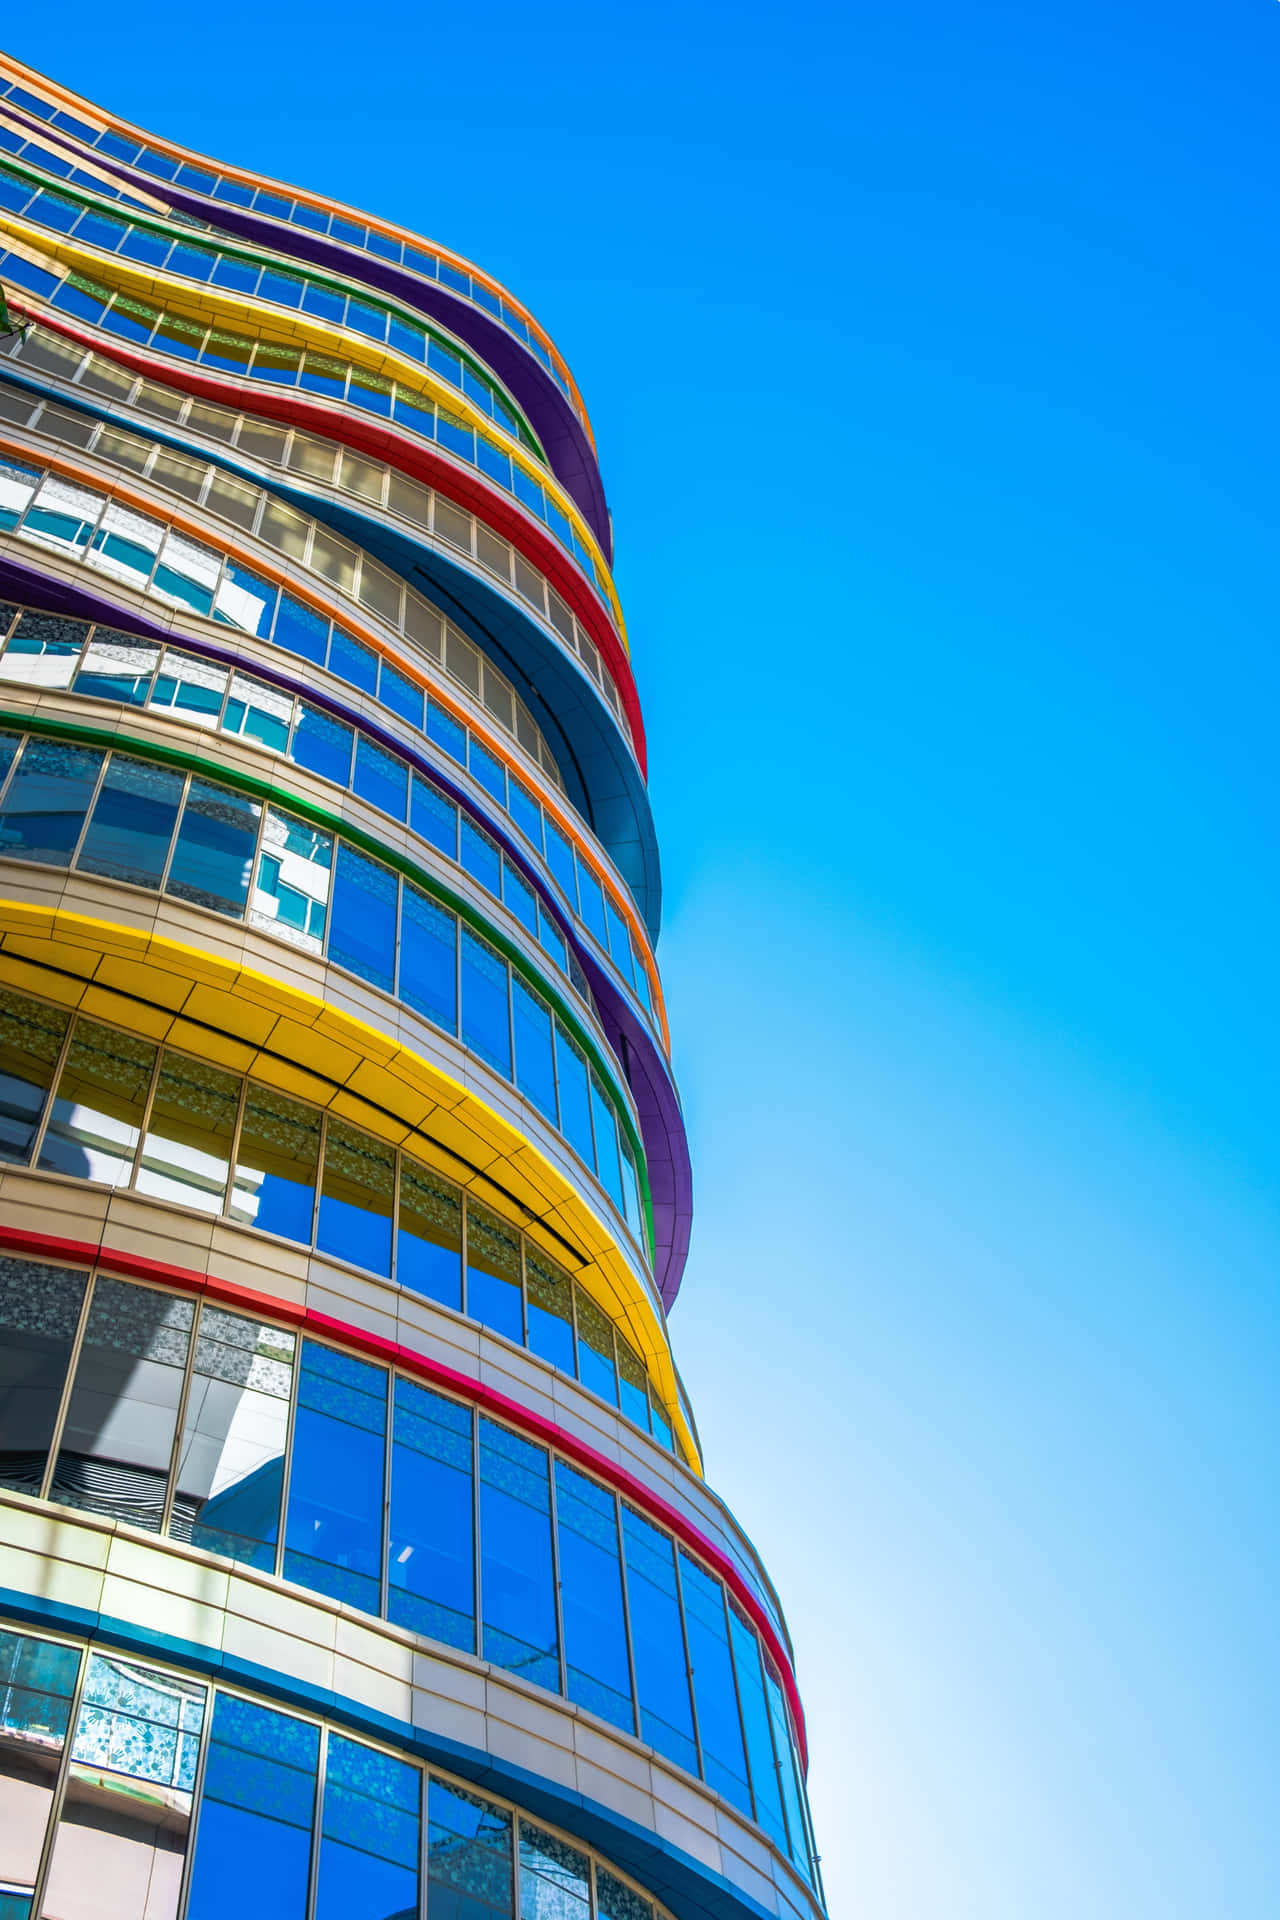 A Building With Colorful Windows Wallpaper